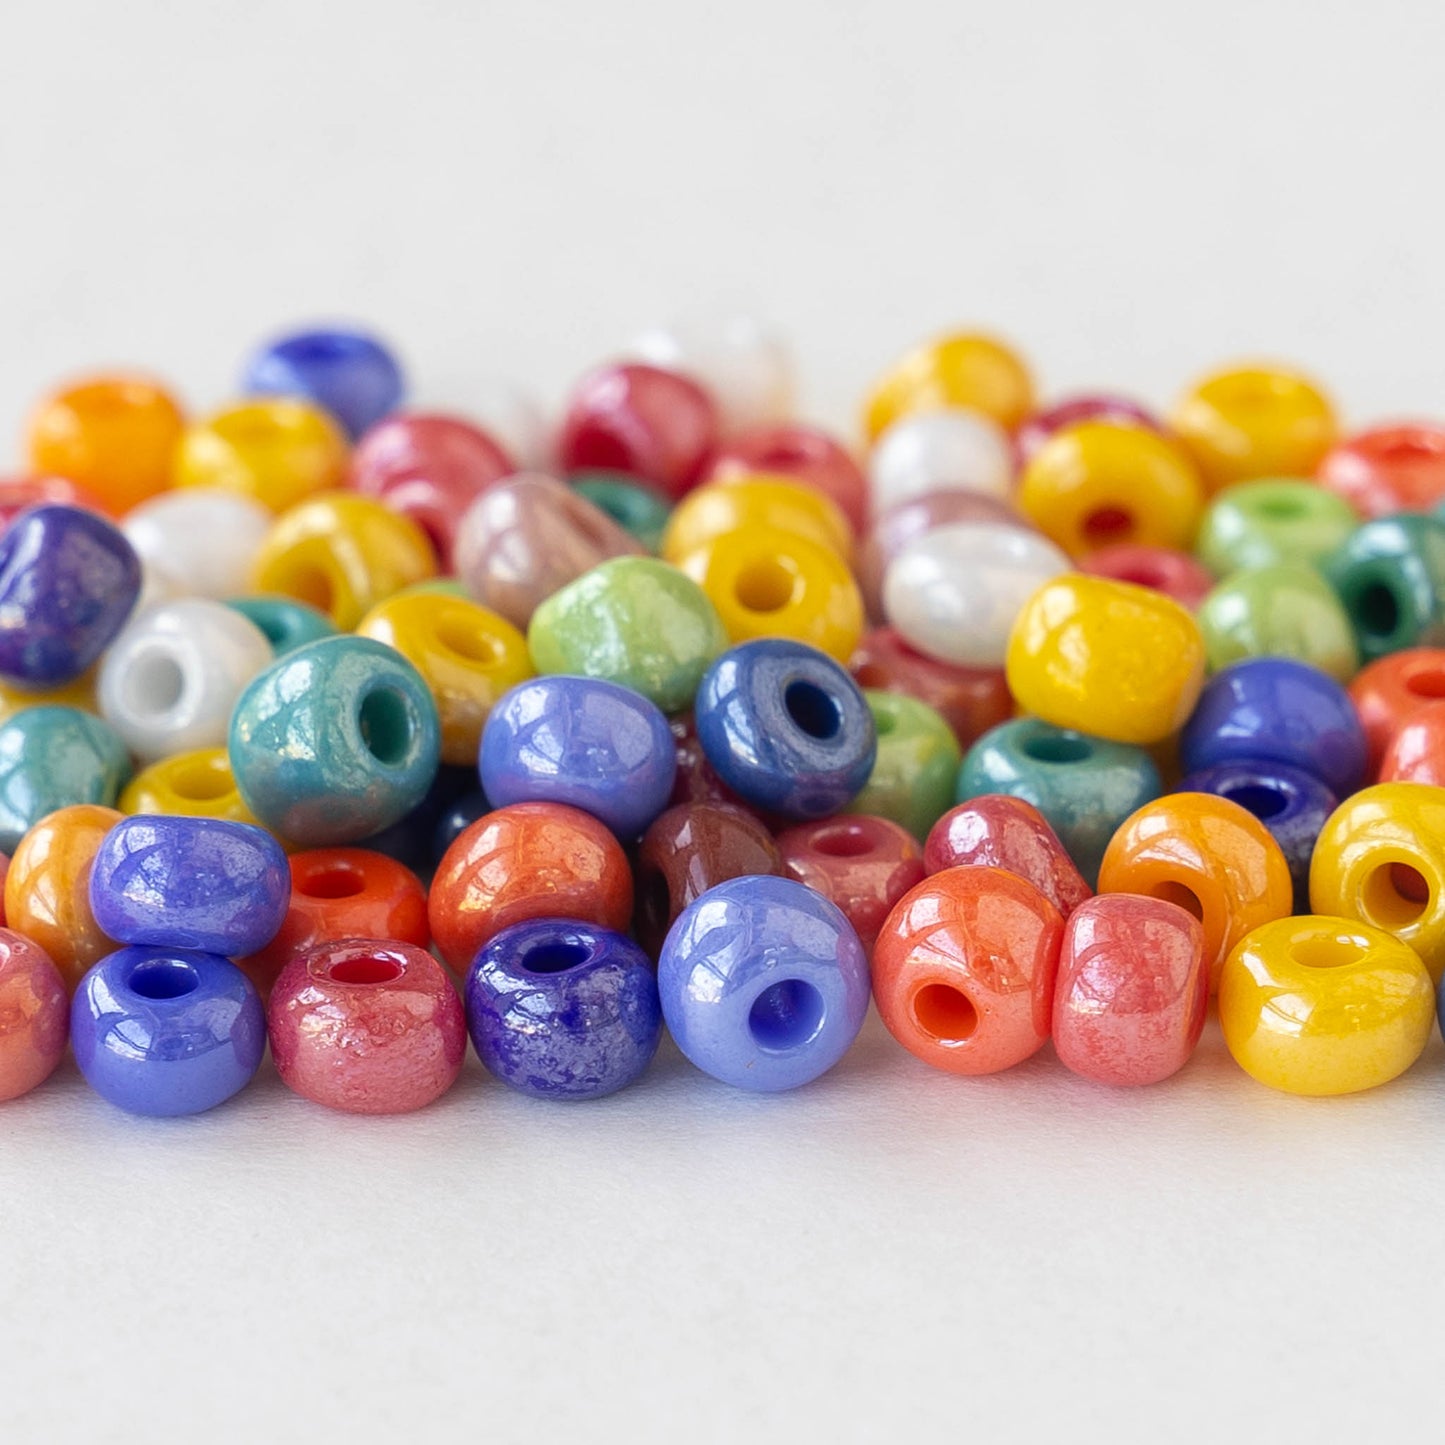 Beads Making 3mm Glass Mix, Seed Beads 3mm Glass, Sizes Seed Beads